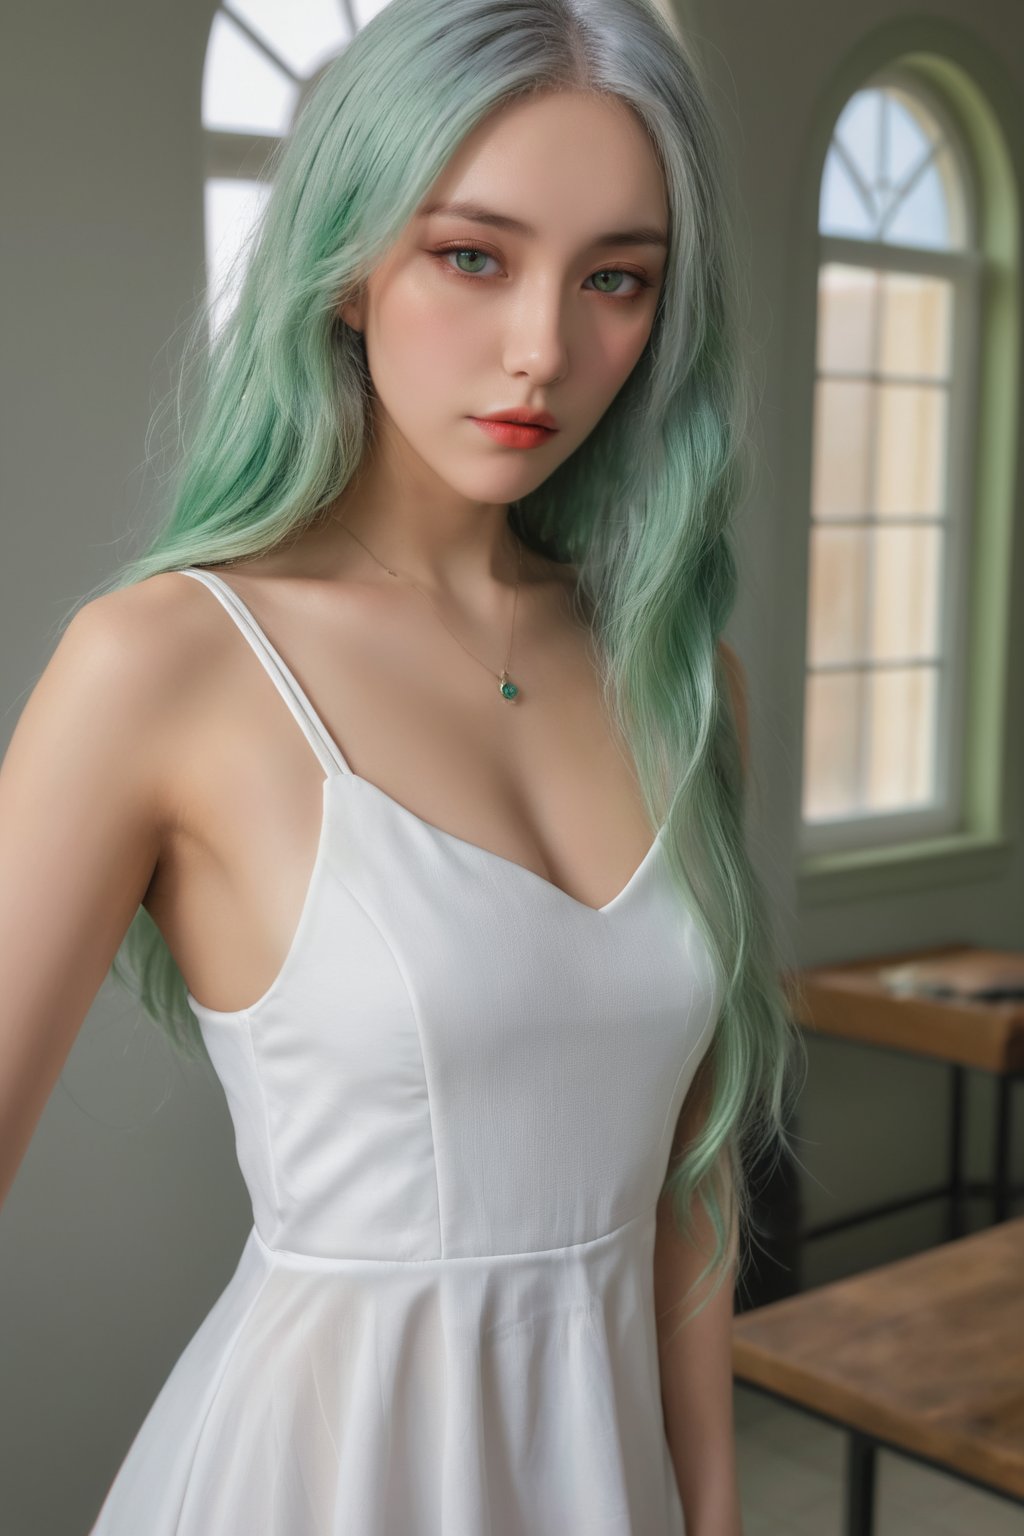 photorealistic,portrait of hubggirl, 
(ultra realistic,best quality),photorealistic,Extremely Realistic, in depth, cinematic light,

1girl, exquisite makeup, eye_contact, ambiguity, huge chest, sexy pose, white dress,
(light green hair,multicolored hair), full body shot,

perfect lighting, vibrant colors, intricate details, high detailed skin, pale skin, intricate background, realism,realistic,raw,analog,portrait,photorealistic, taken by Canon EOS,SIGMA Art Lens 35mm F1.4,ISO 200 Shutter Speed 2000,Vivid picture,